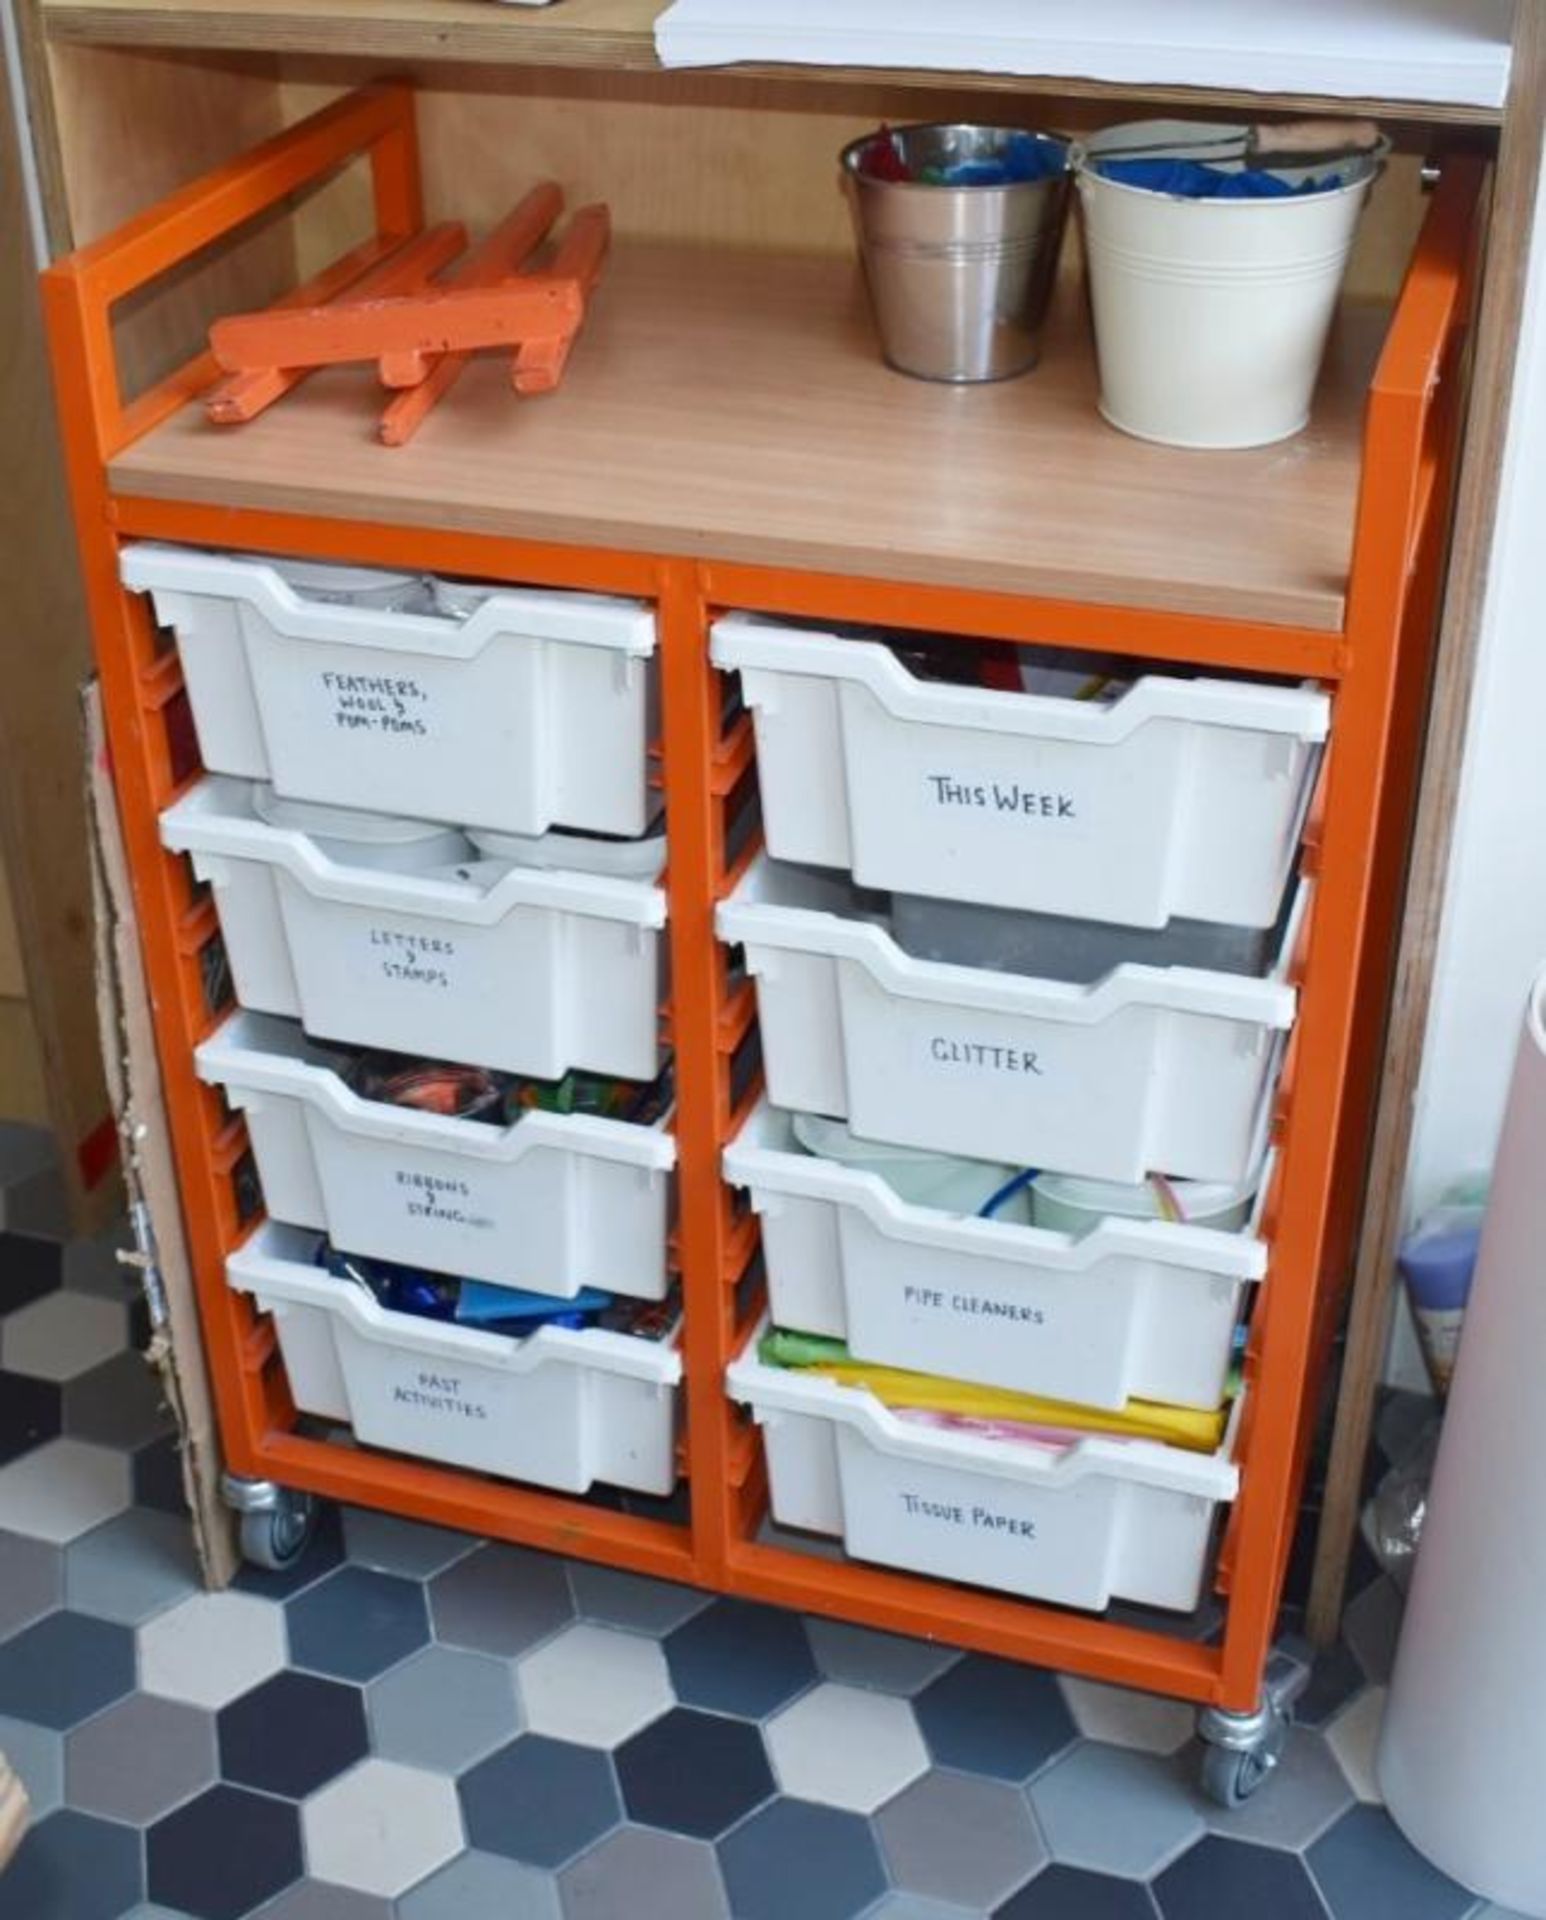 1 x Mobile Trolley With Eight Plastic Drawers - Features Orange Frame, Castor Wheels, Wood Surface